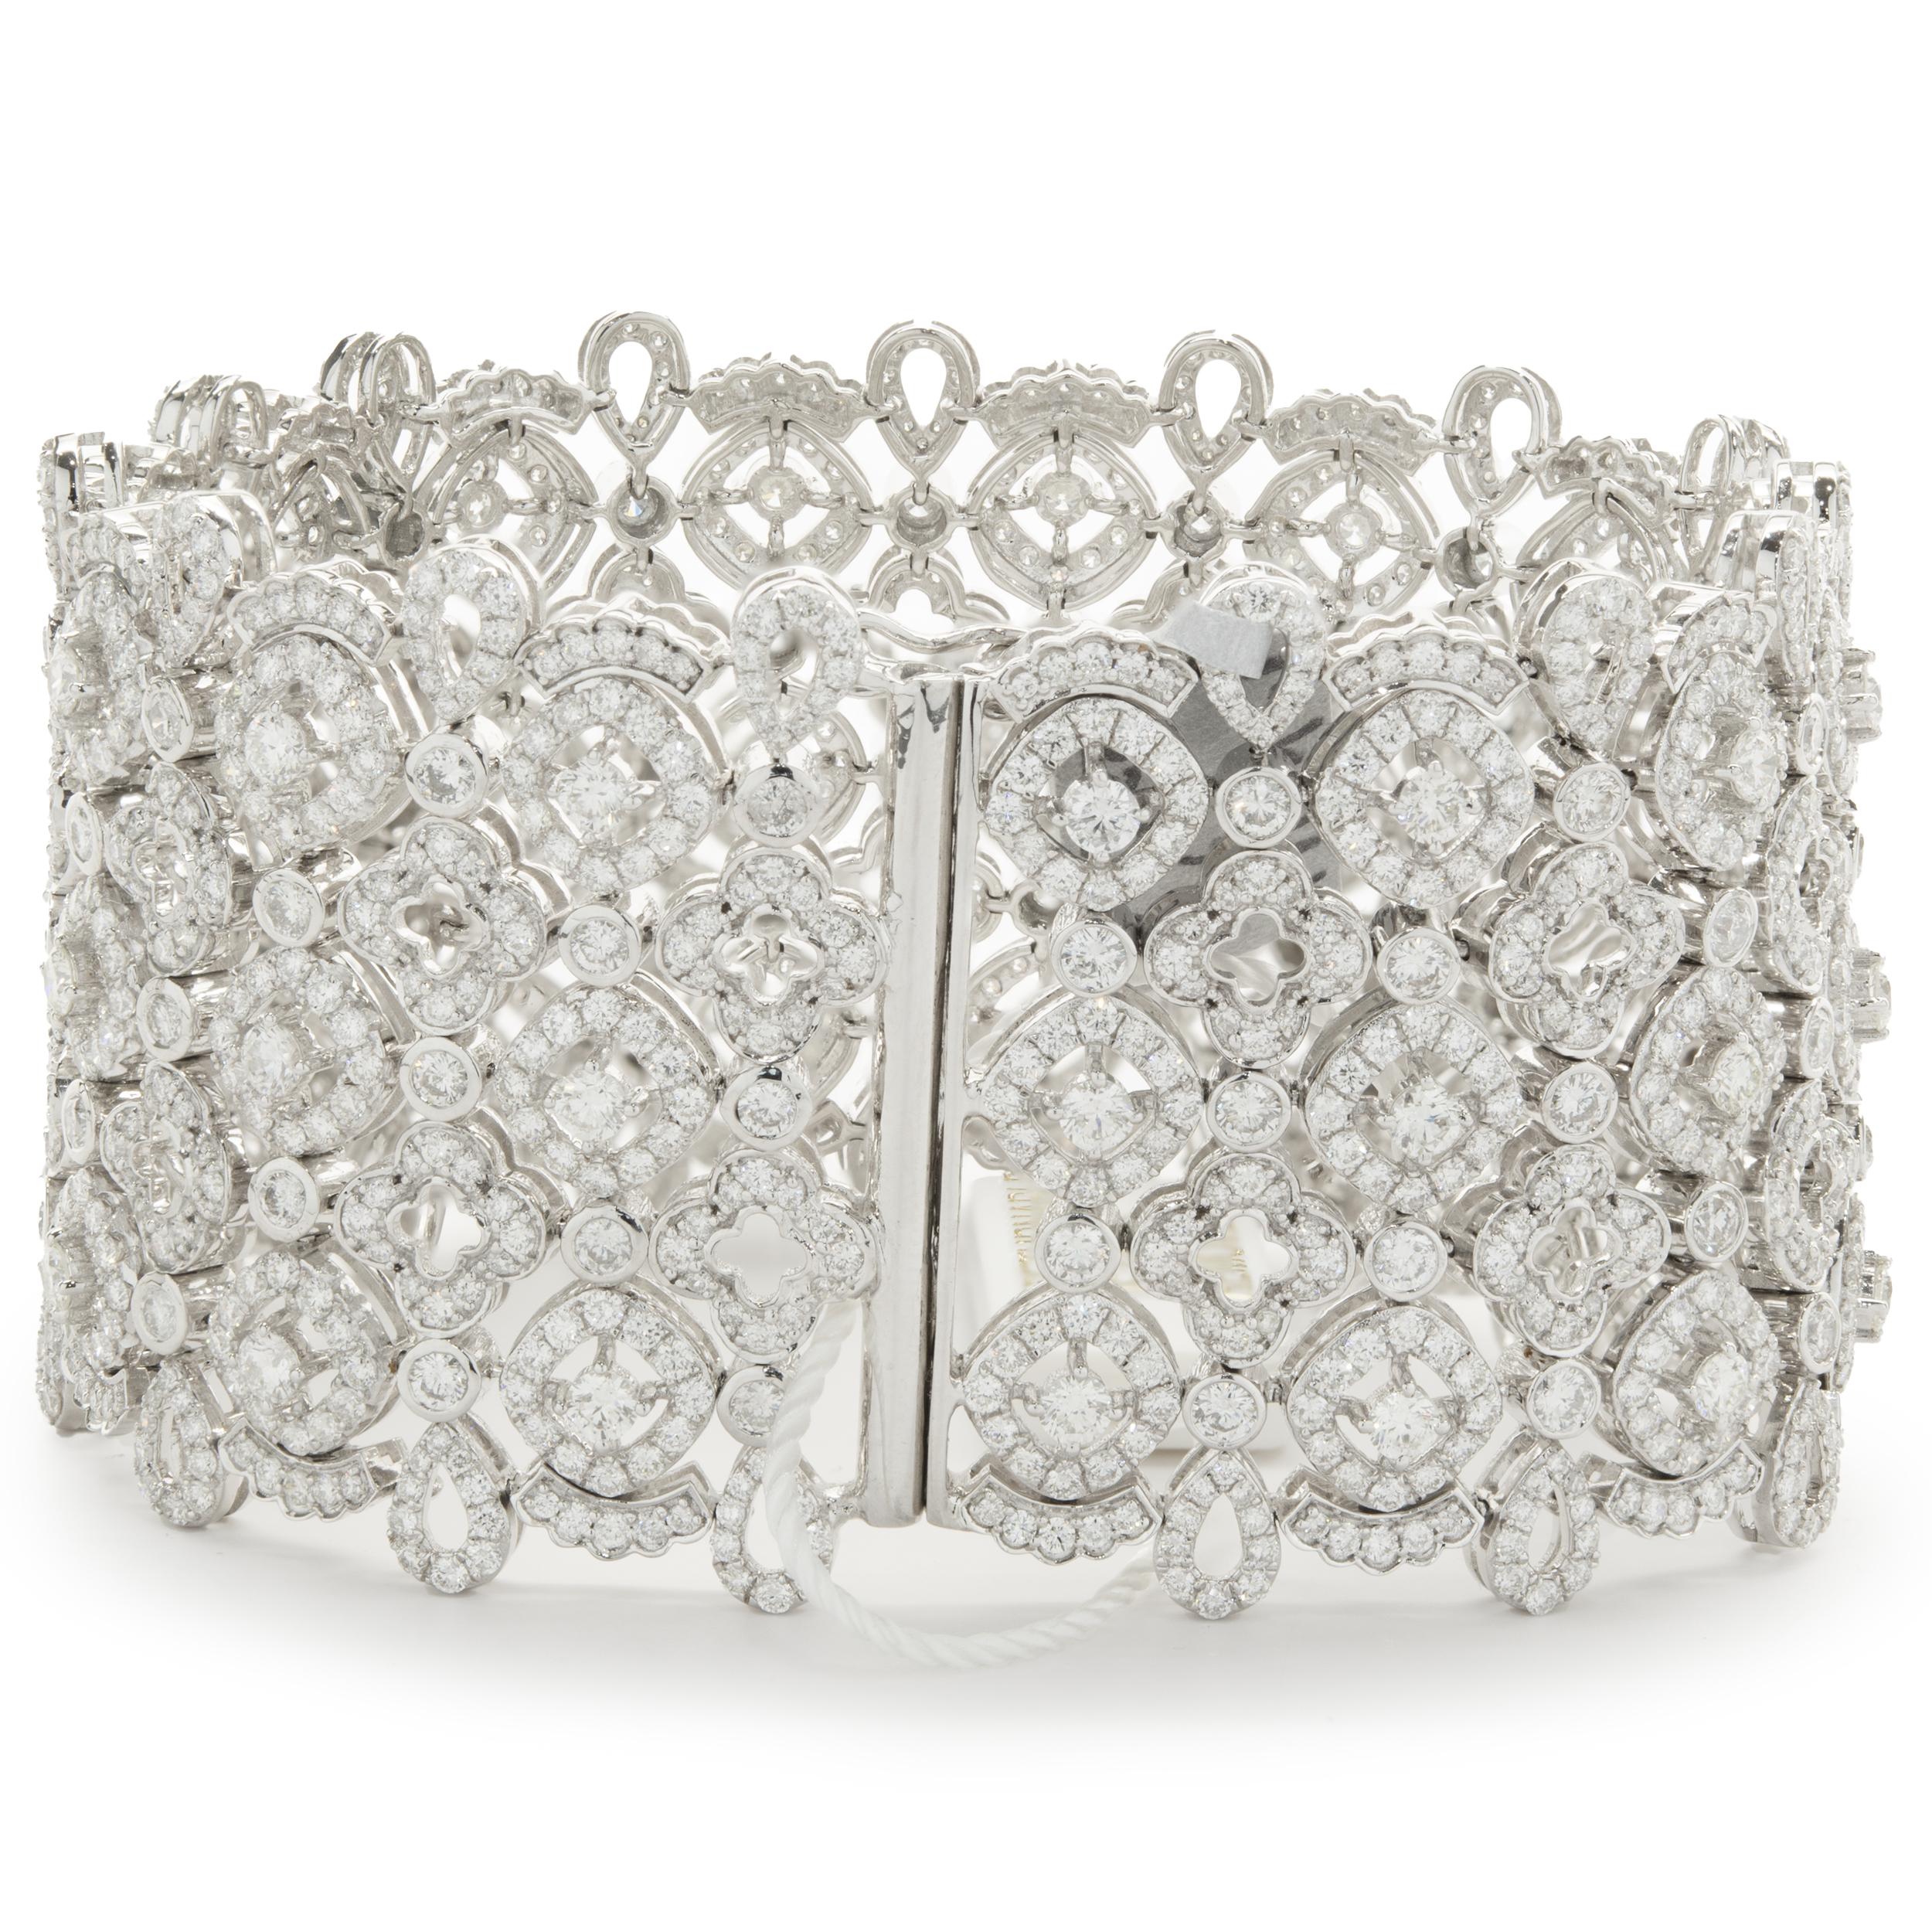 Designer: custom design
Material: 14K white gold
Diamonds: round brilliant cut = 20.45cttw
Color: F / G
Clarity: VS1-2
Dimensions: bracelet measures 7.25-inches in length 
Weight: 79.78 grams
